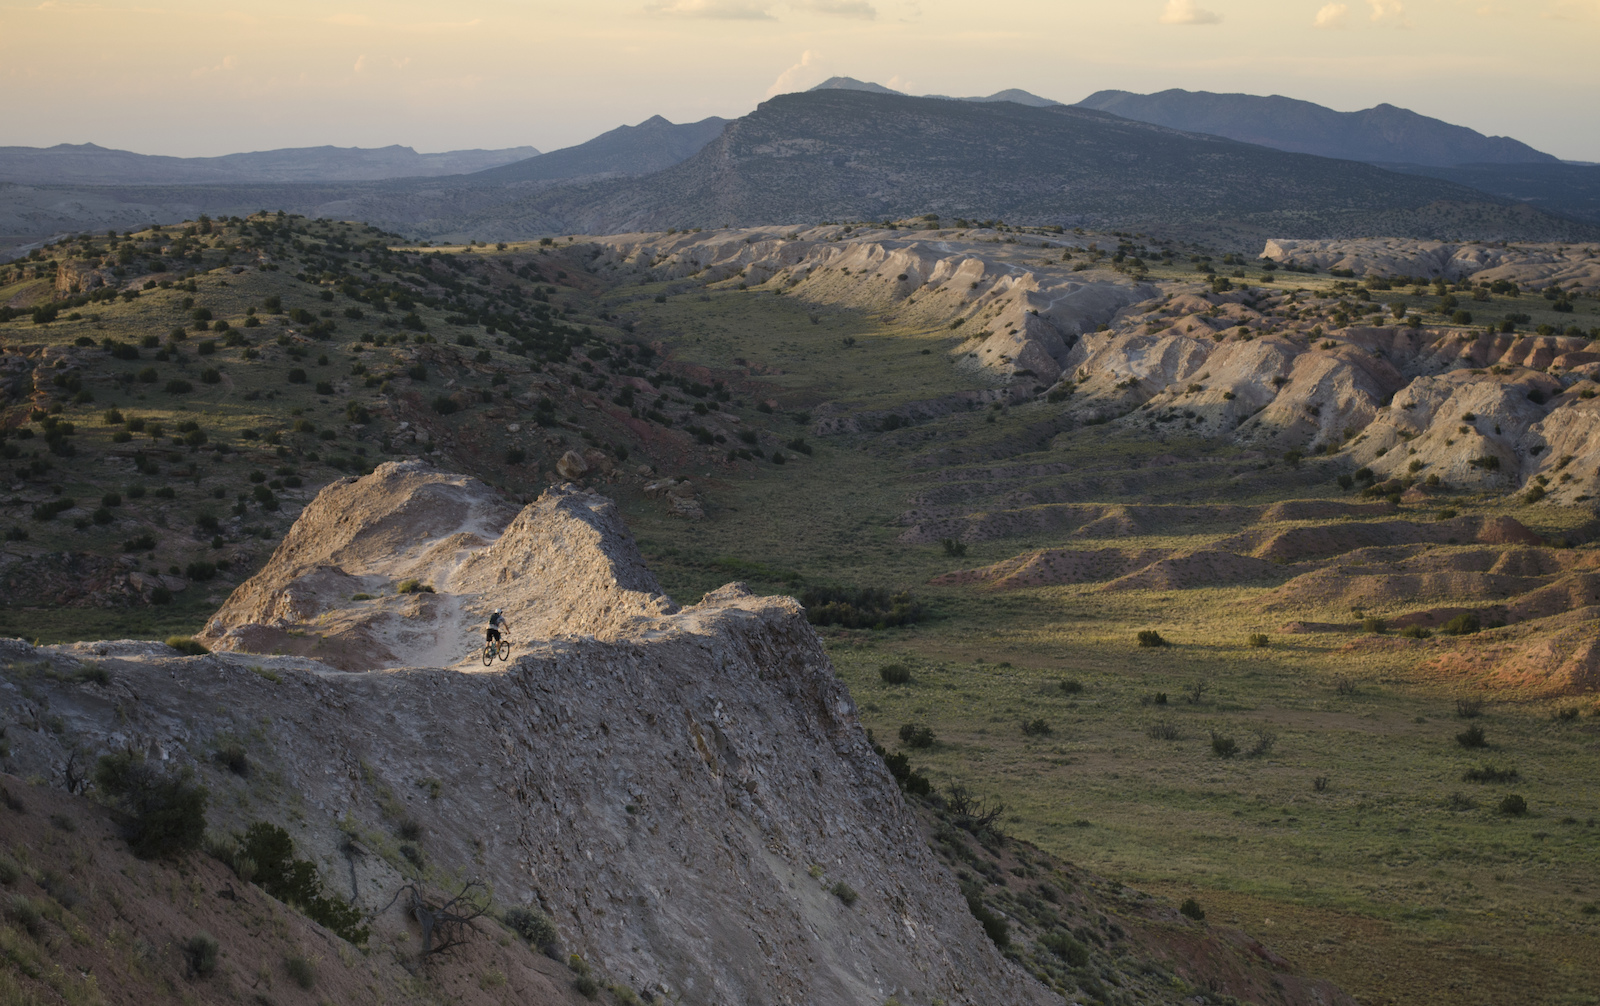 Matt Brignace charges the most exposed trail in New Mexico, The Central Spine, as the desert sun fades away.